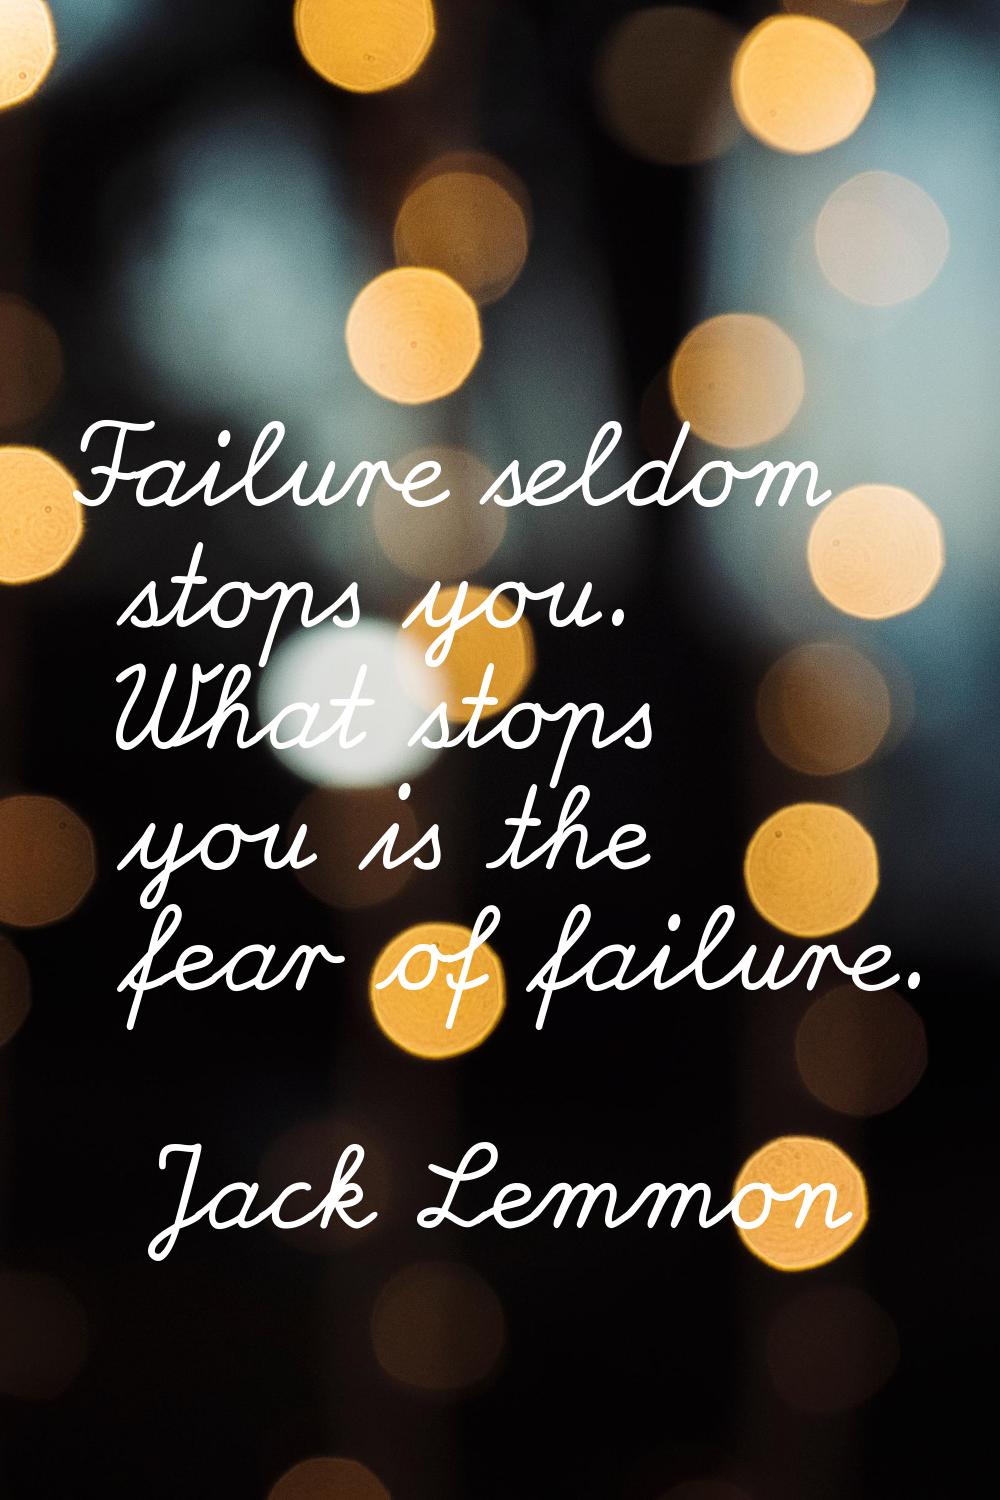 Failure seldom stops you. What stops you is the fear of failure.